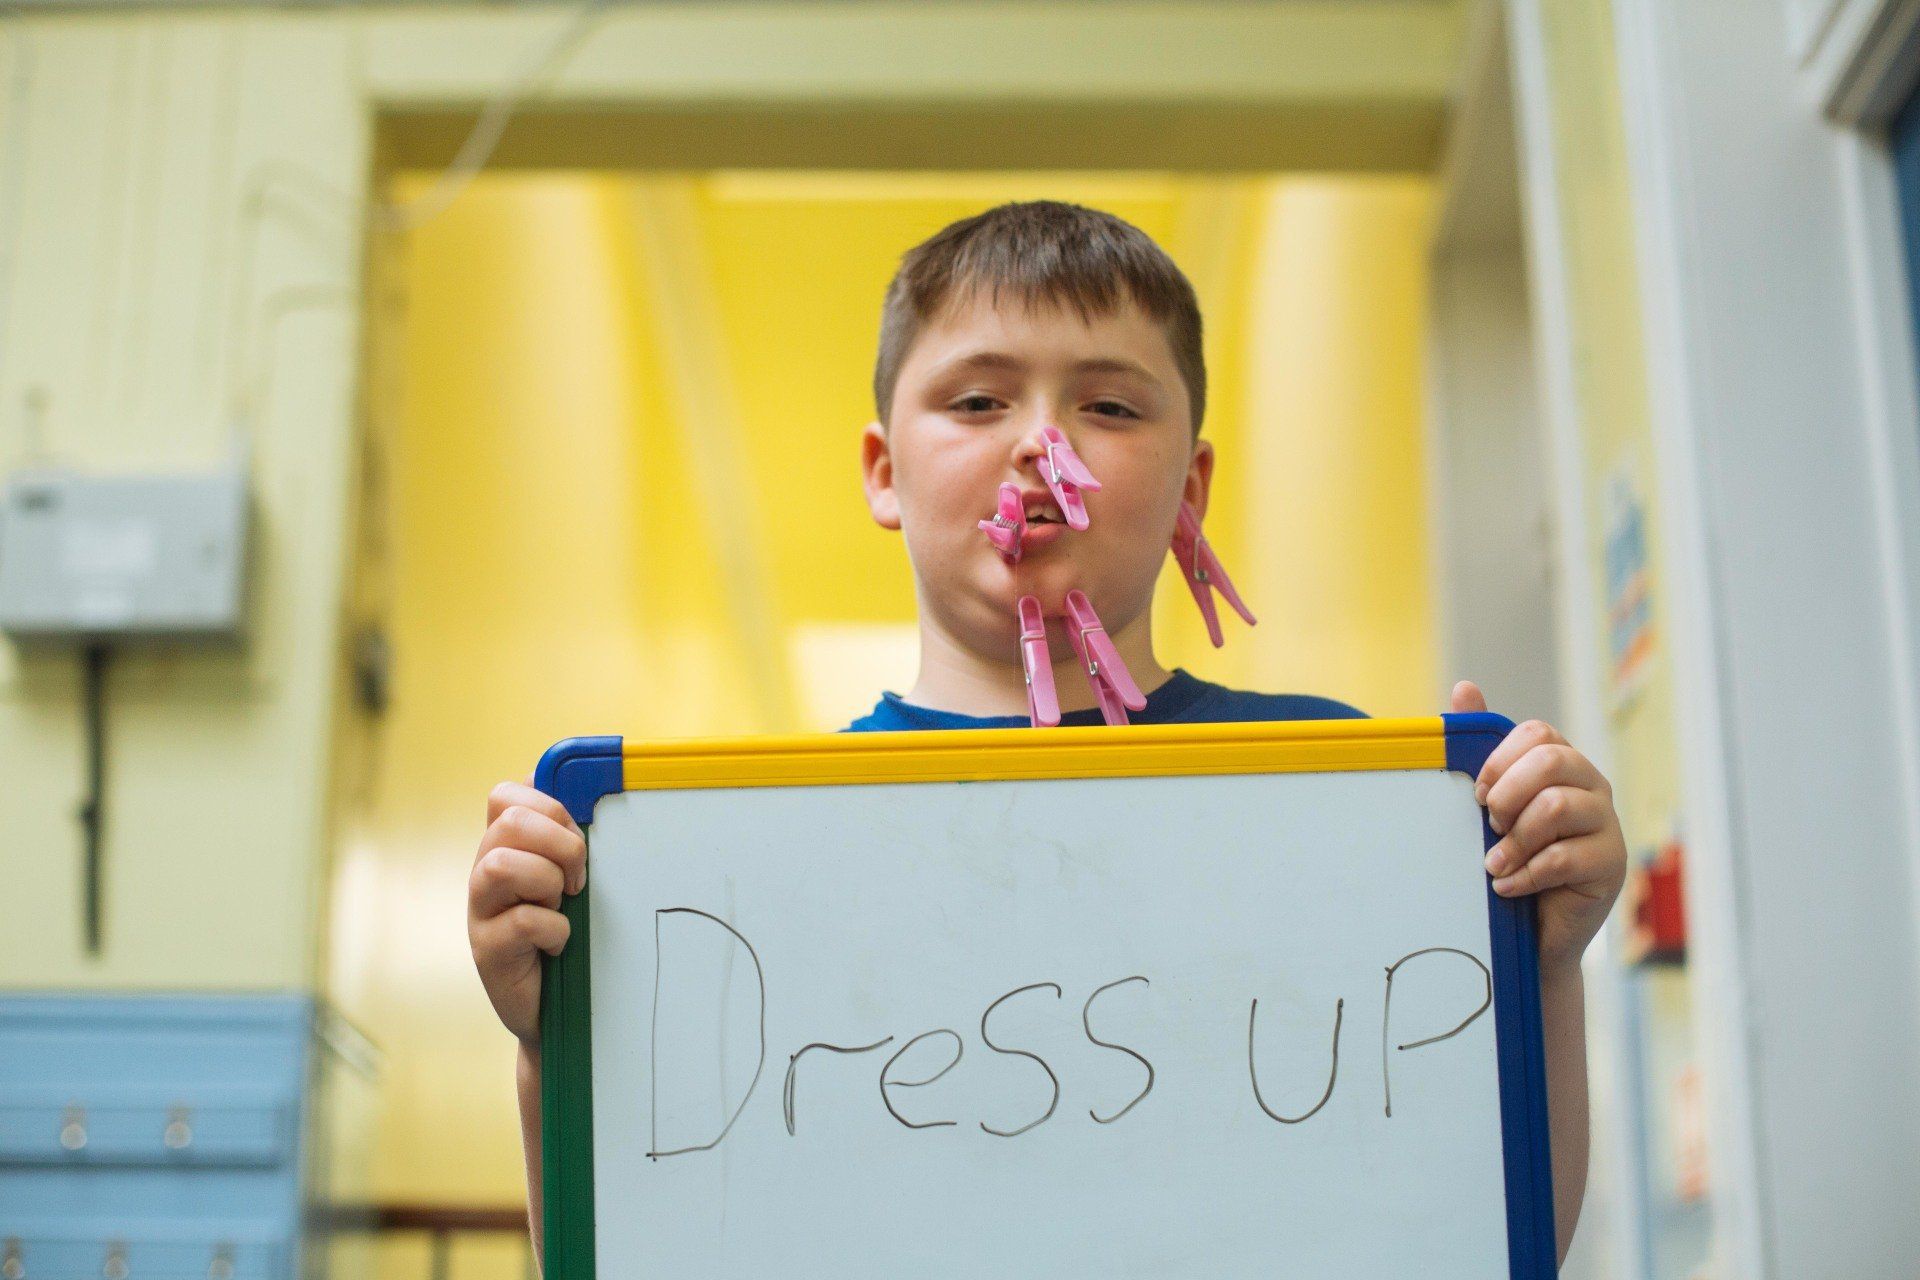 a young boy is holding a sign that says dress up